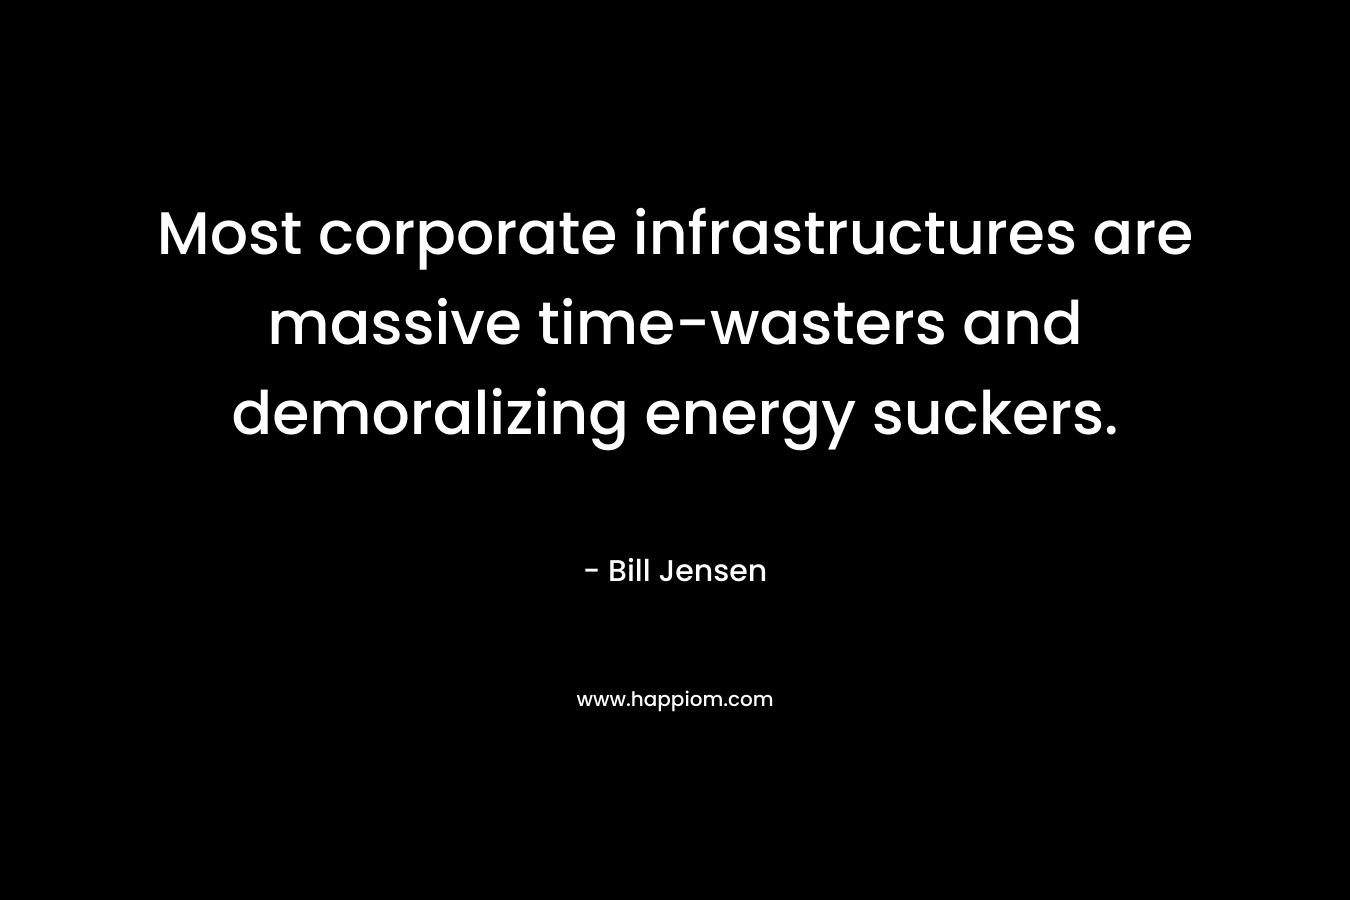 Most corporate infrastructures are massive time-wasters and demoralizing energy suckers.